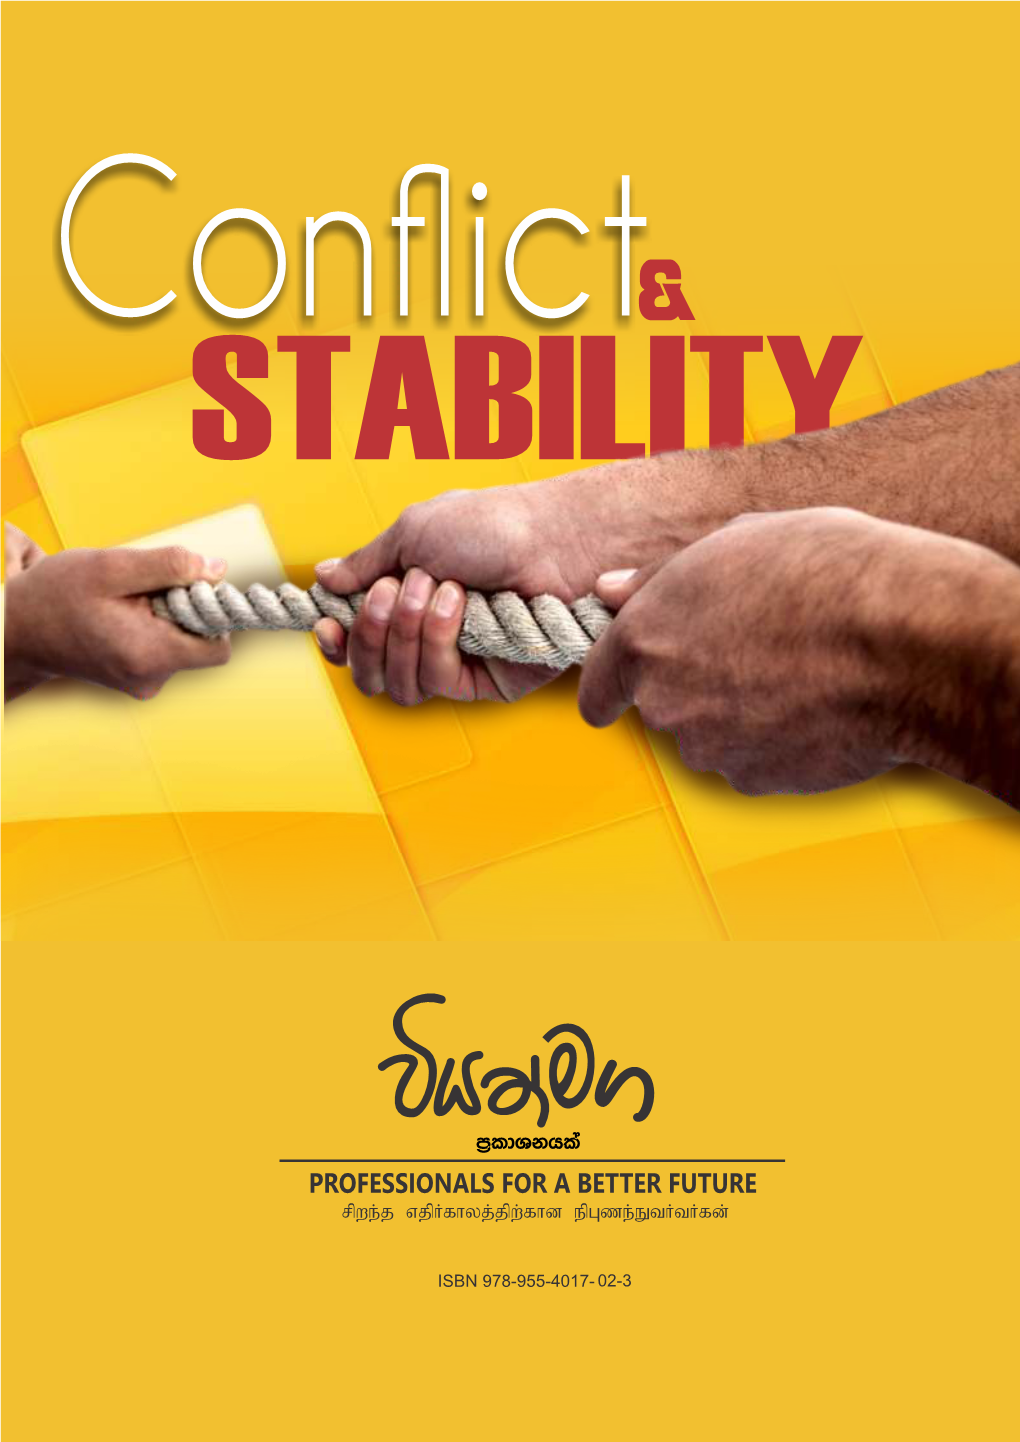 From Conflict to Stability: a True Account of the Effort in the Revival of the Northern and Eastern Provinces of Sri Lanka During the Presidency of H.E